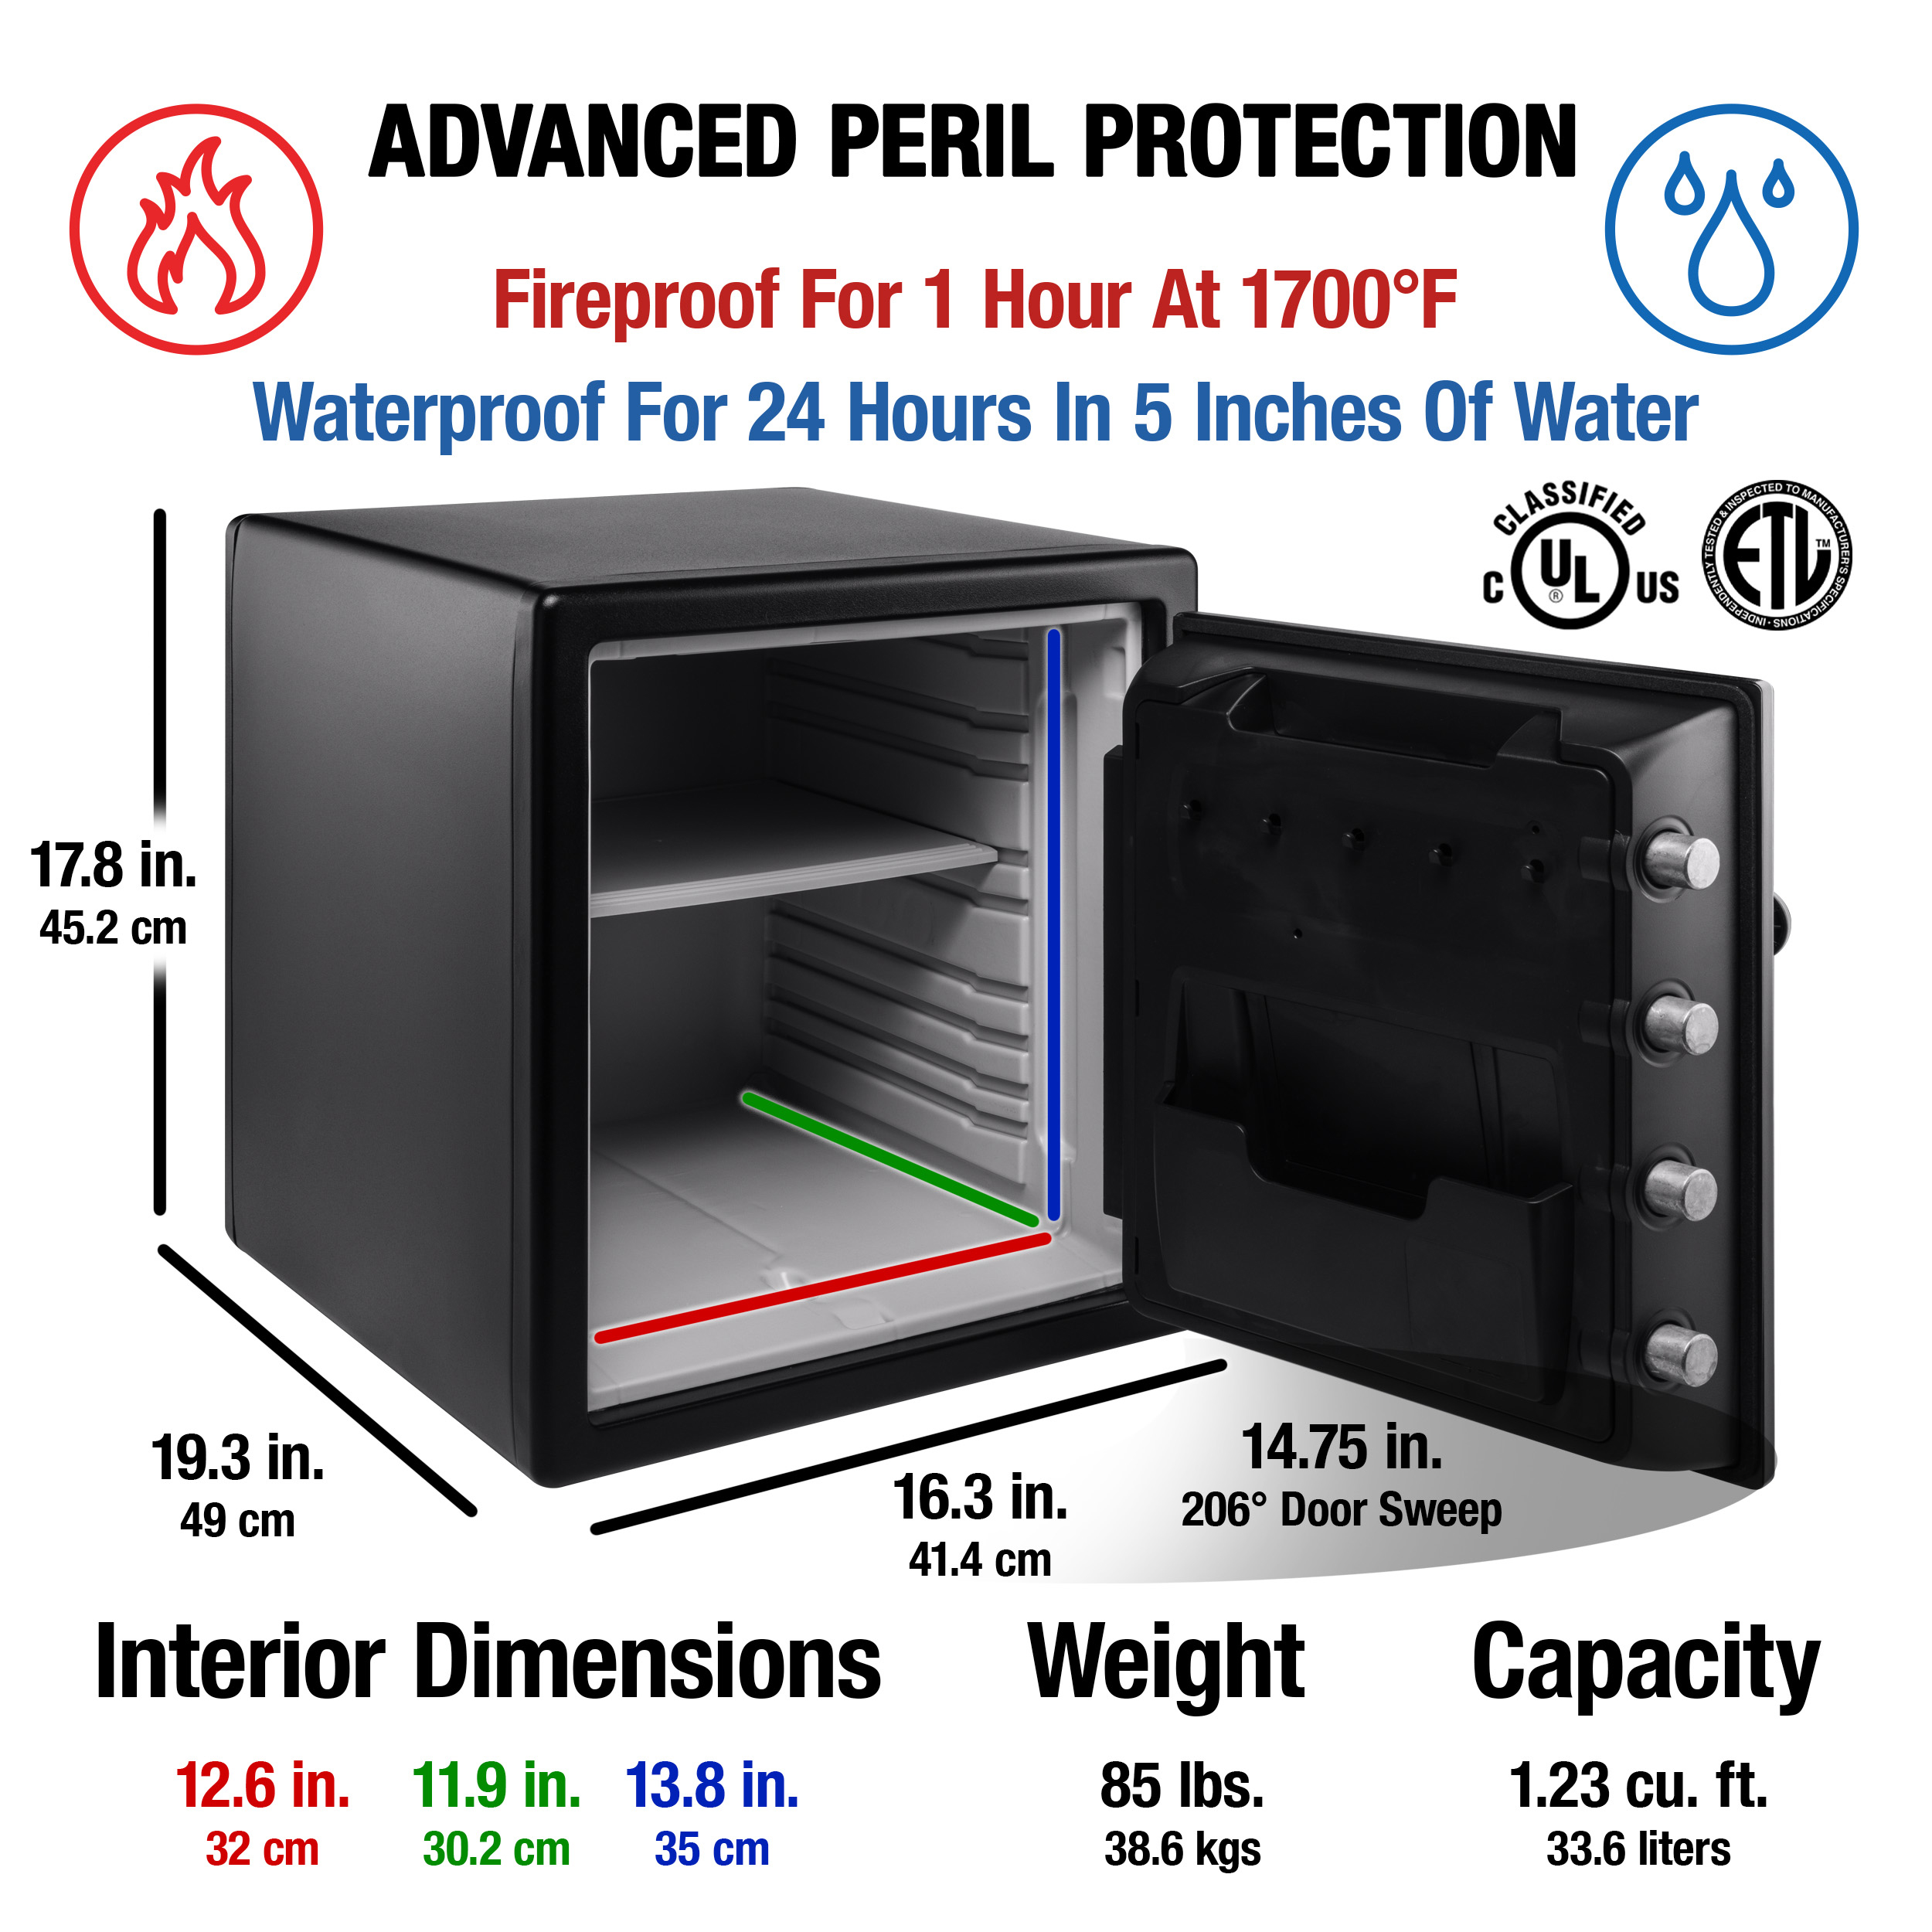 SentrySafe SFW123CS Fire-Resistant Safe and Waterproof Safe with Dial Combination Lock, 1.23 cu. ft. - image 4 of 7